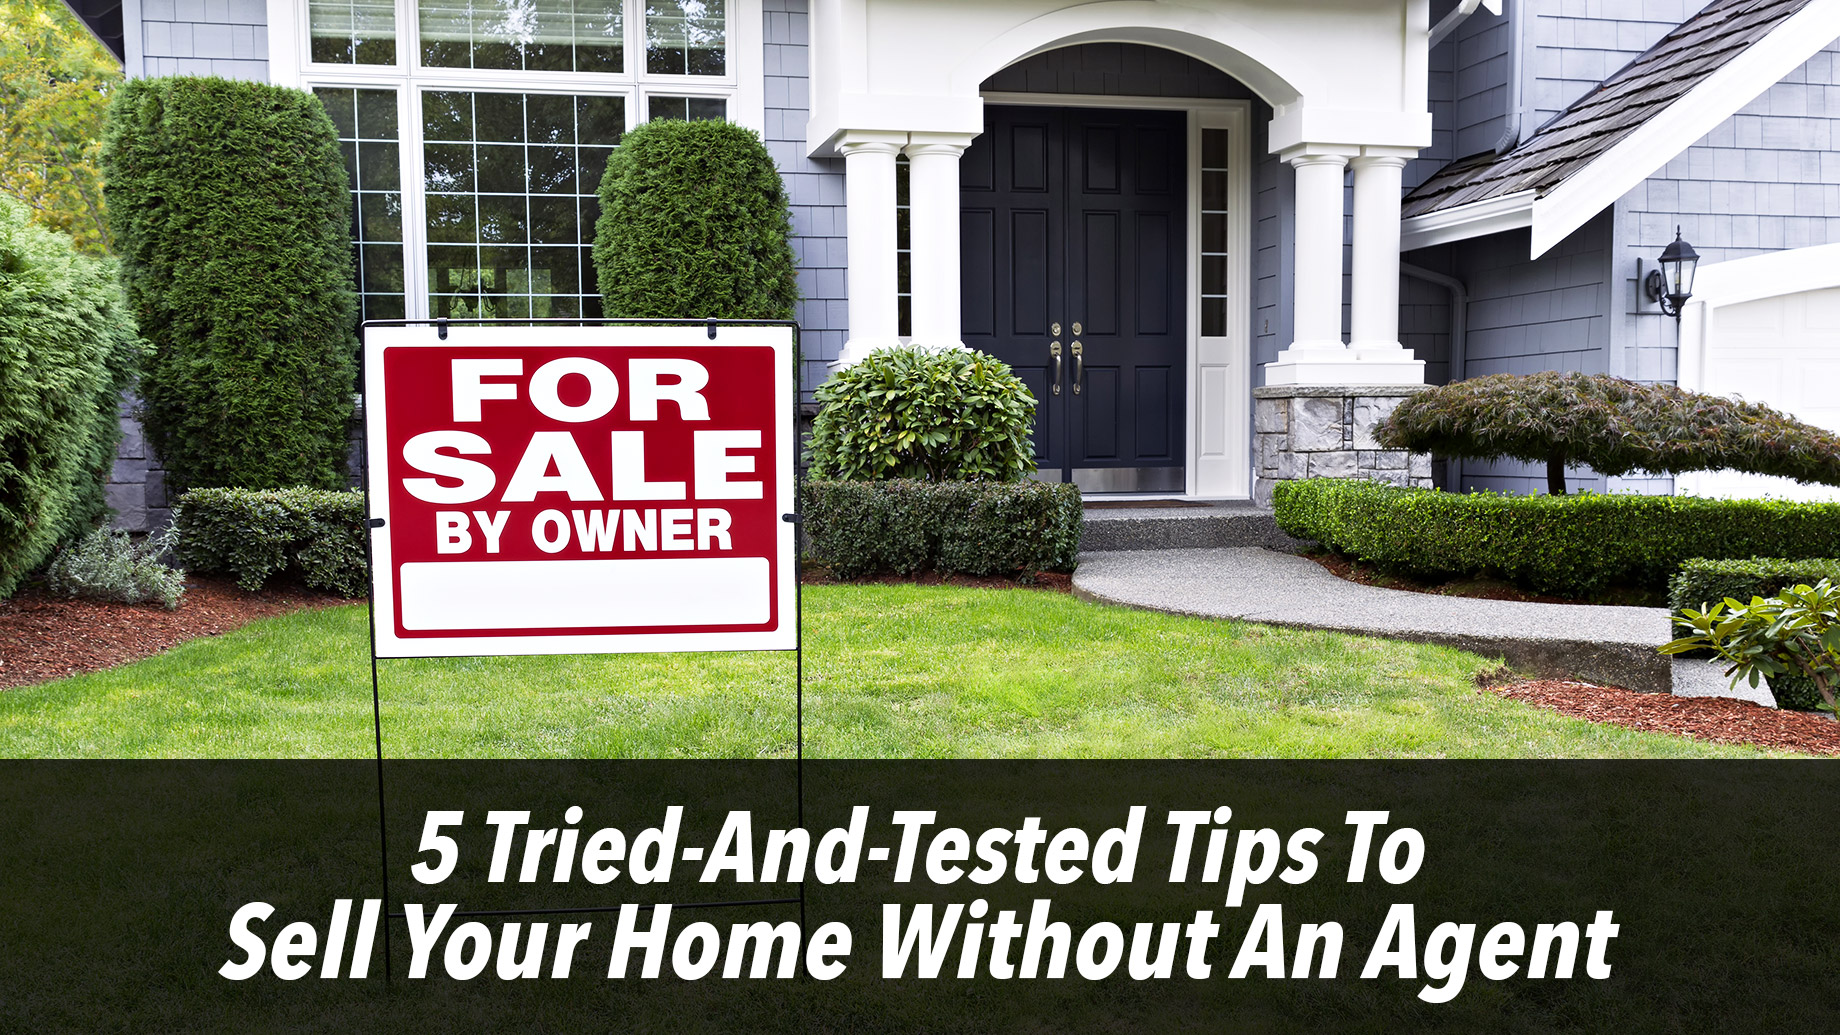 5 Tried-And-Tested Tips To Sell Your Home Without An Agent